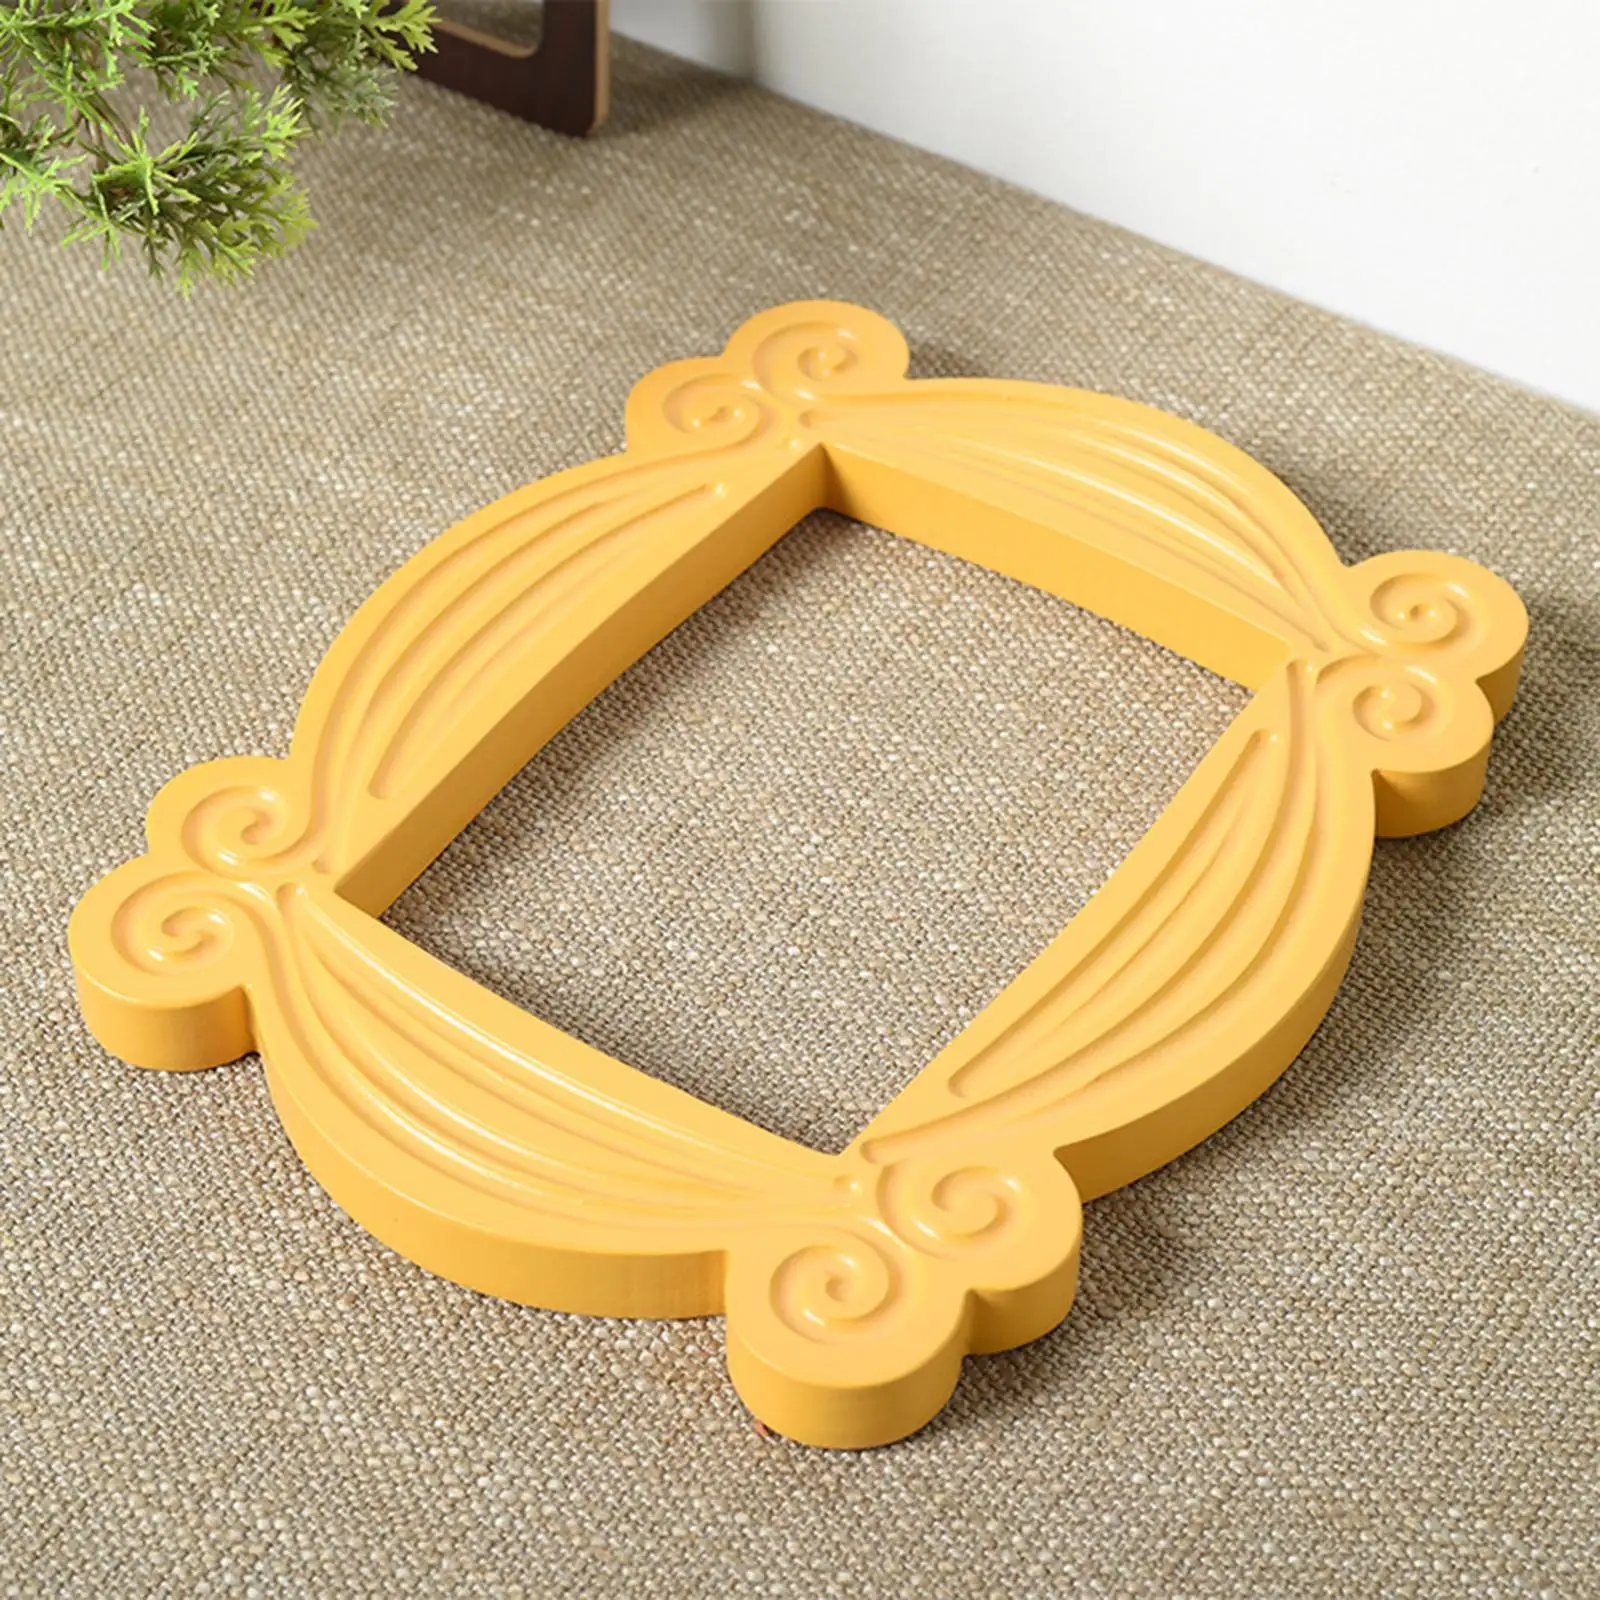 Handmade TV Series Friends Handmade Picture Door Frame Wood Yellow Photo Frames Collectible Home Decor Collection Cosplay Gift